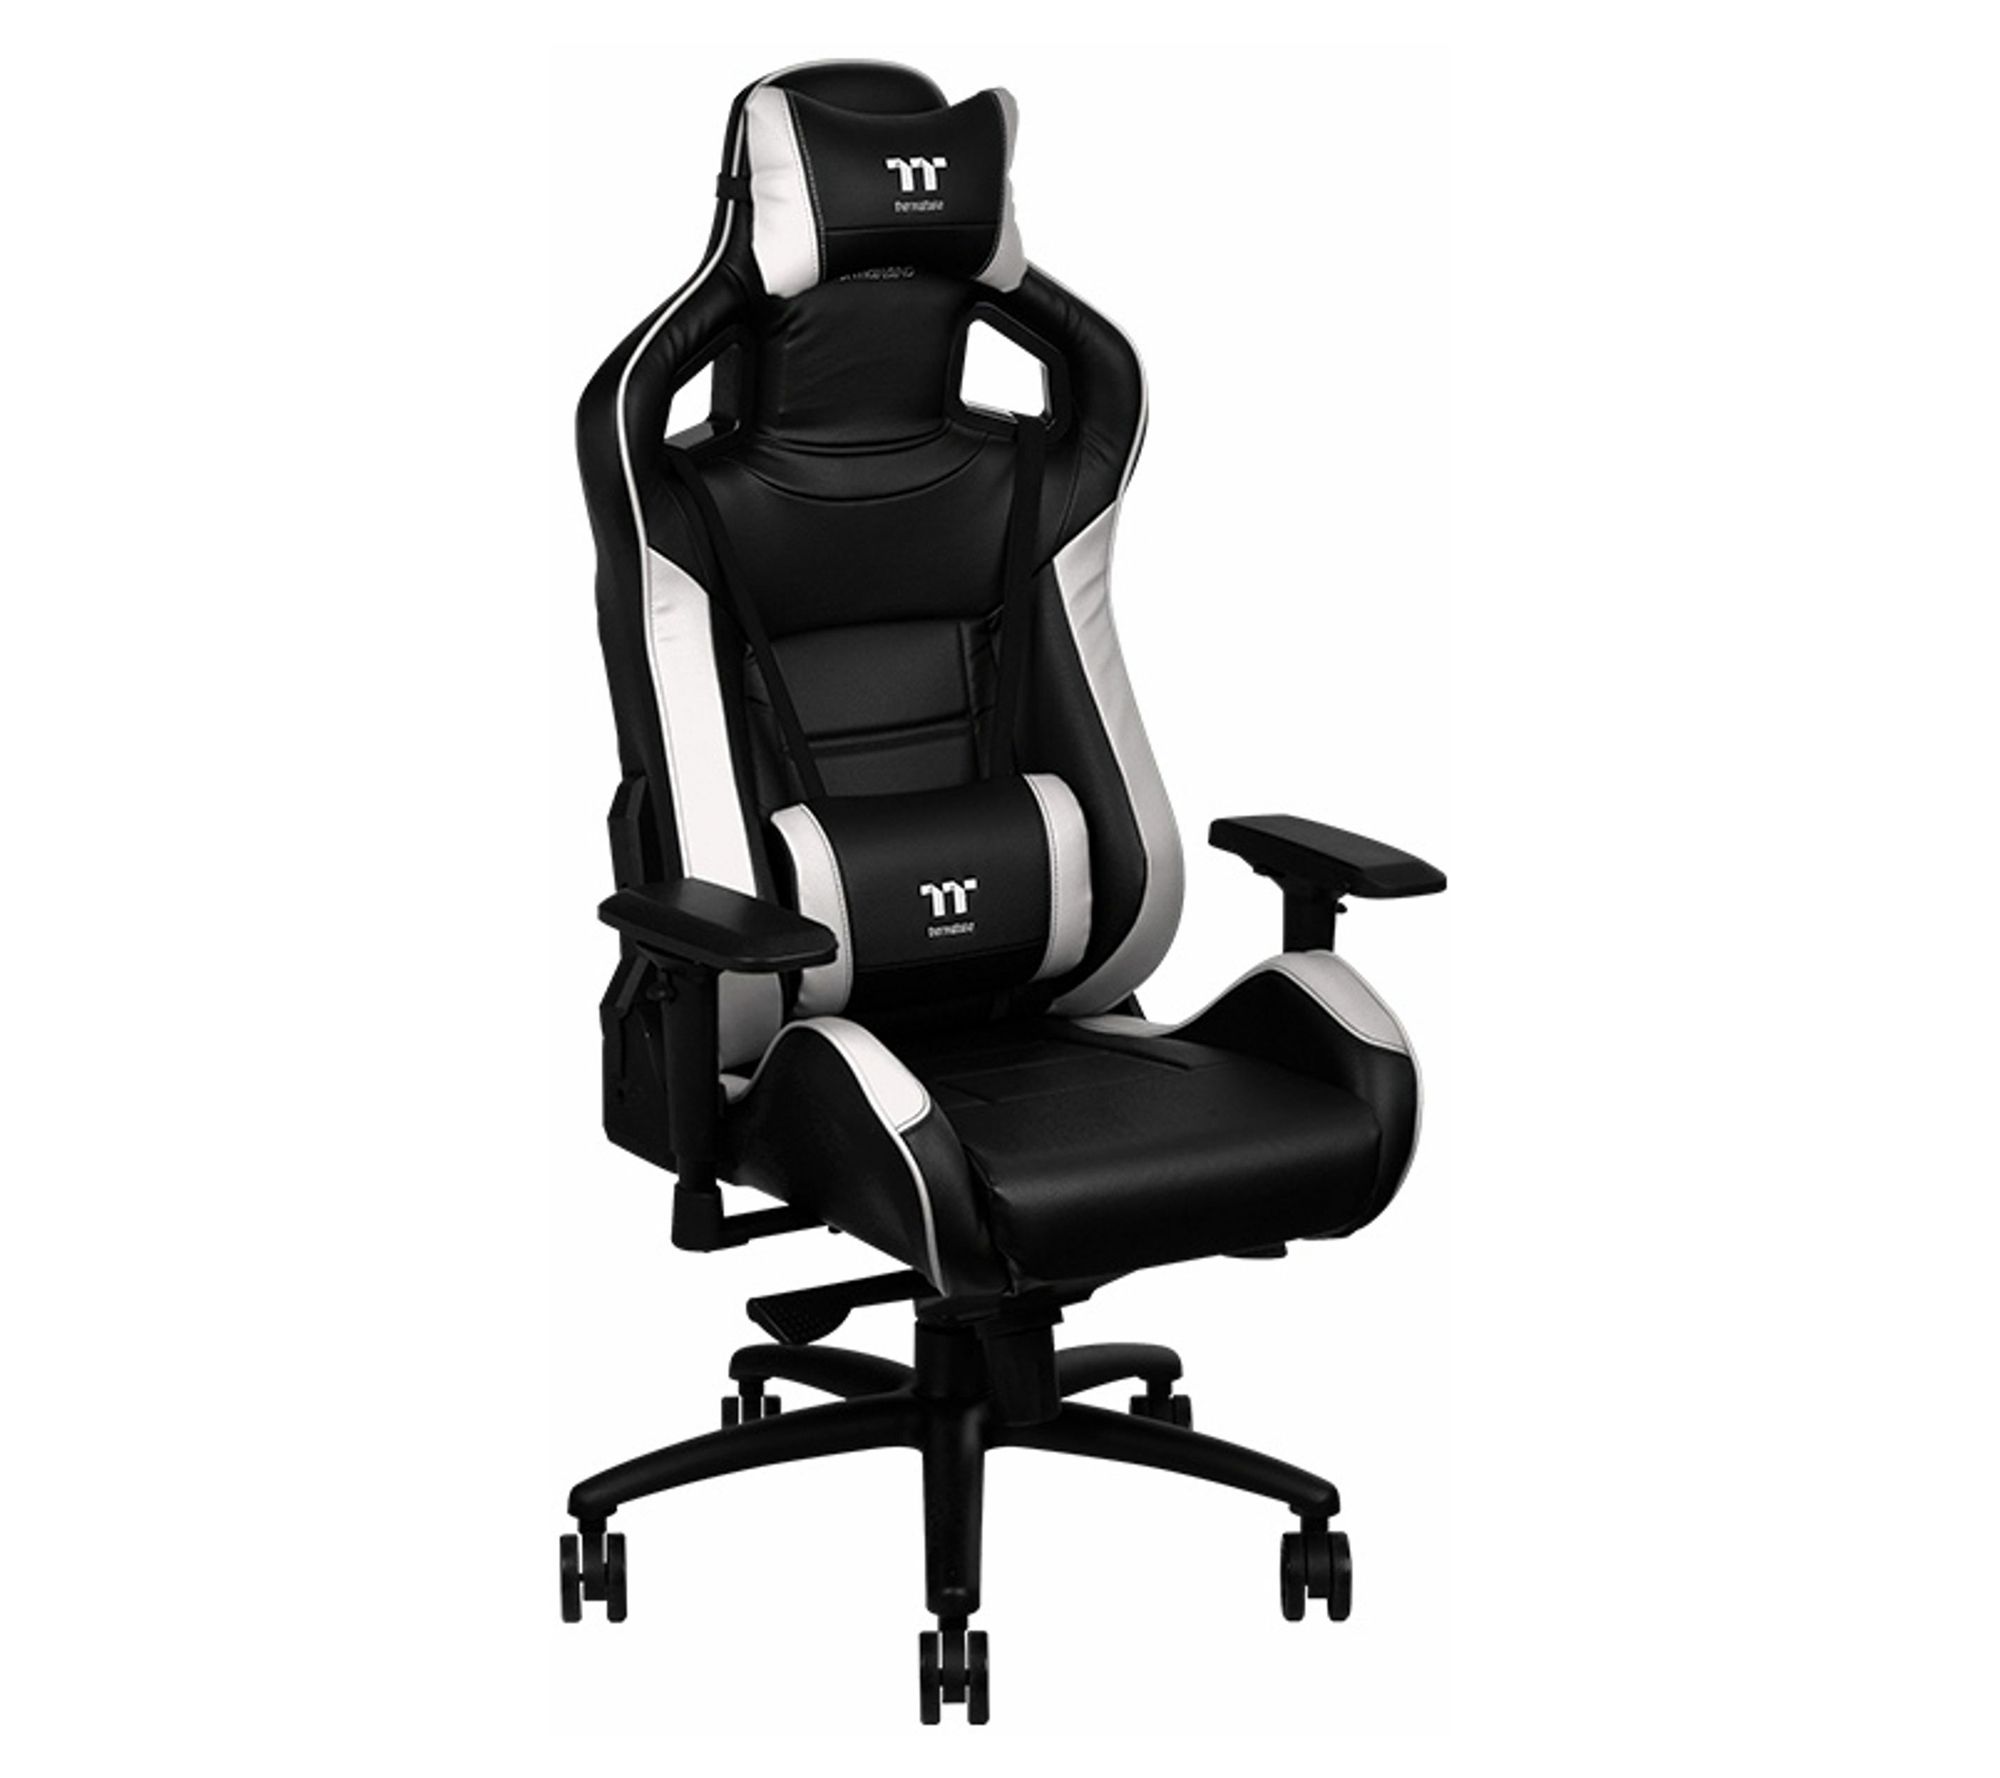 Thermaltake's Latest Gaming Chair Sports Active Cooling